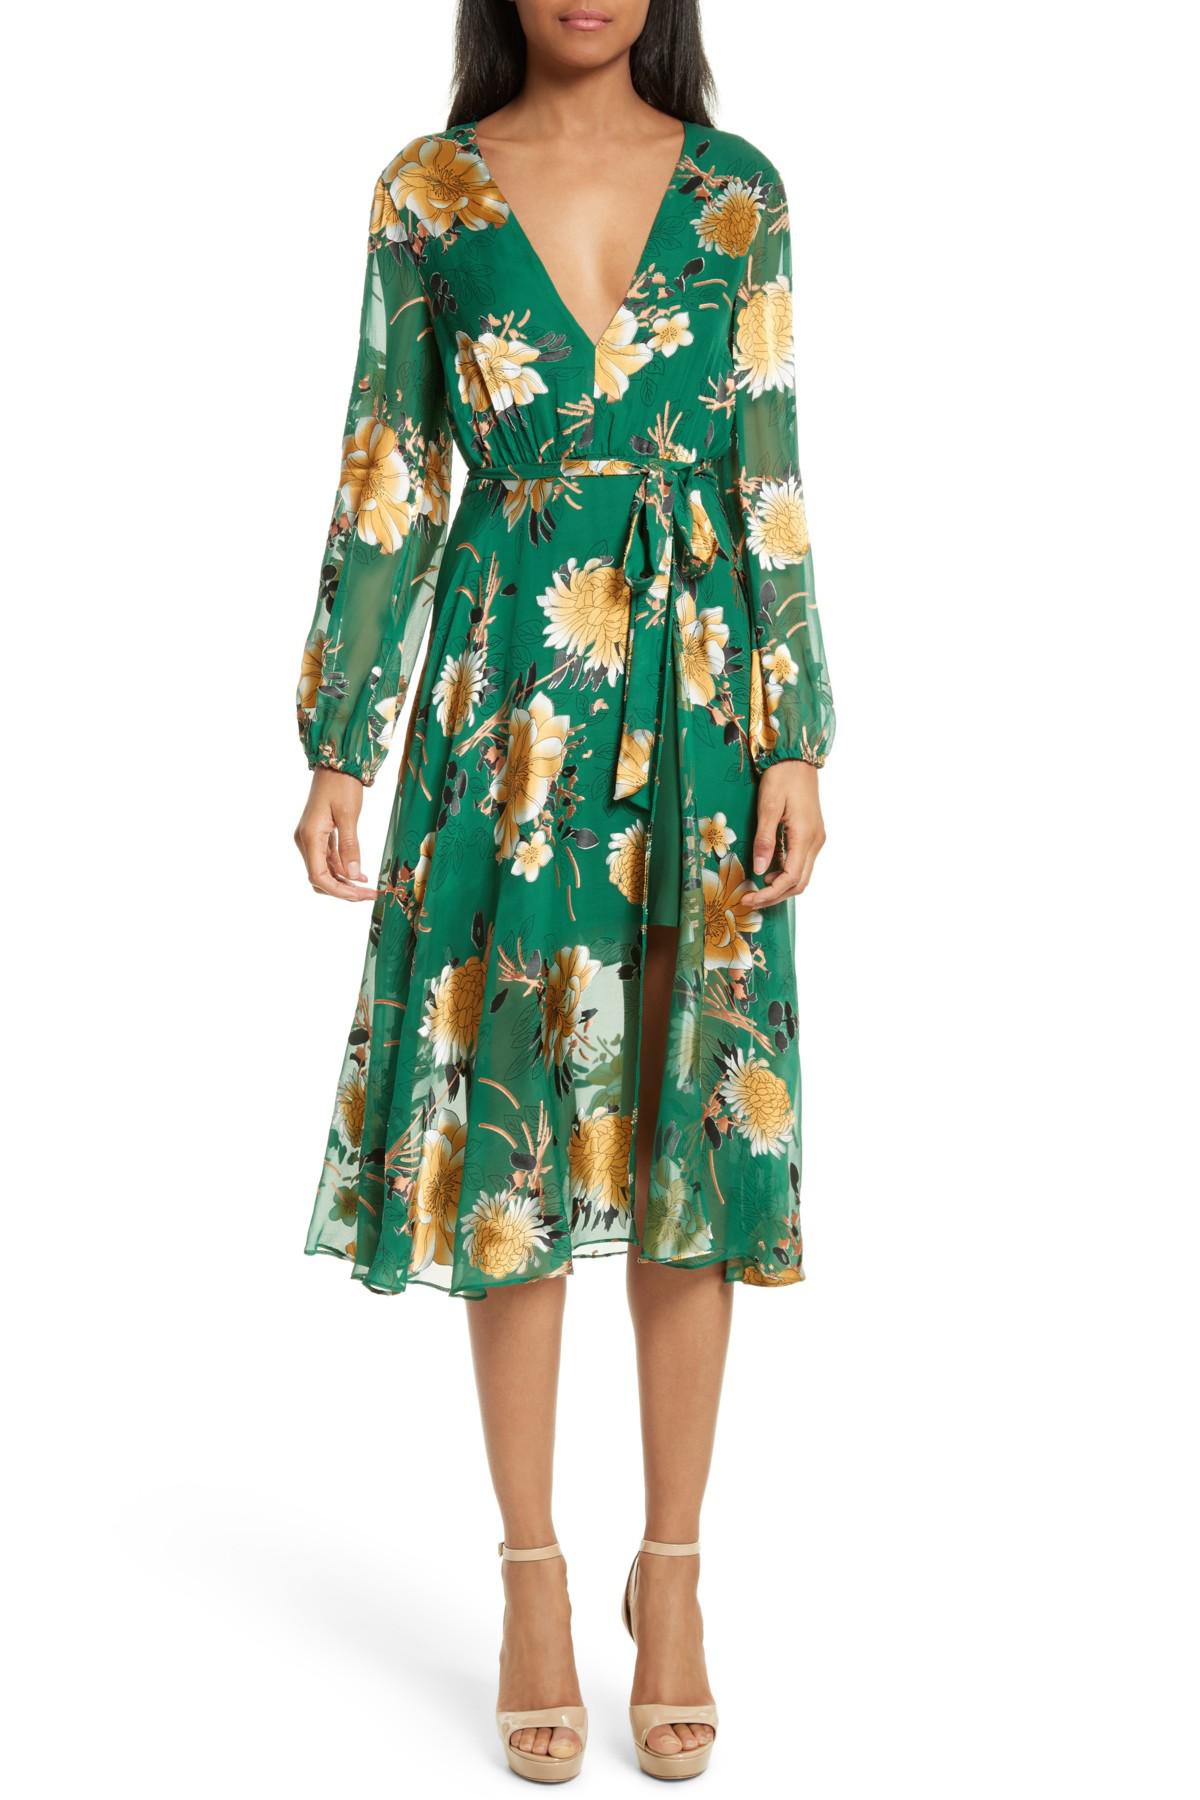 Alice + Olivia Coco Floral Print A-line Dress in Green | Lyst